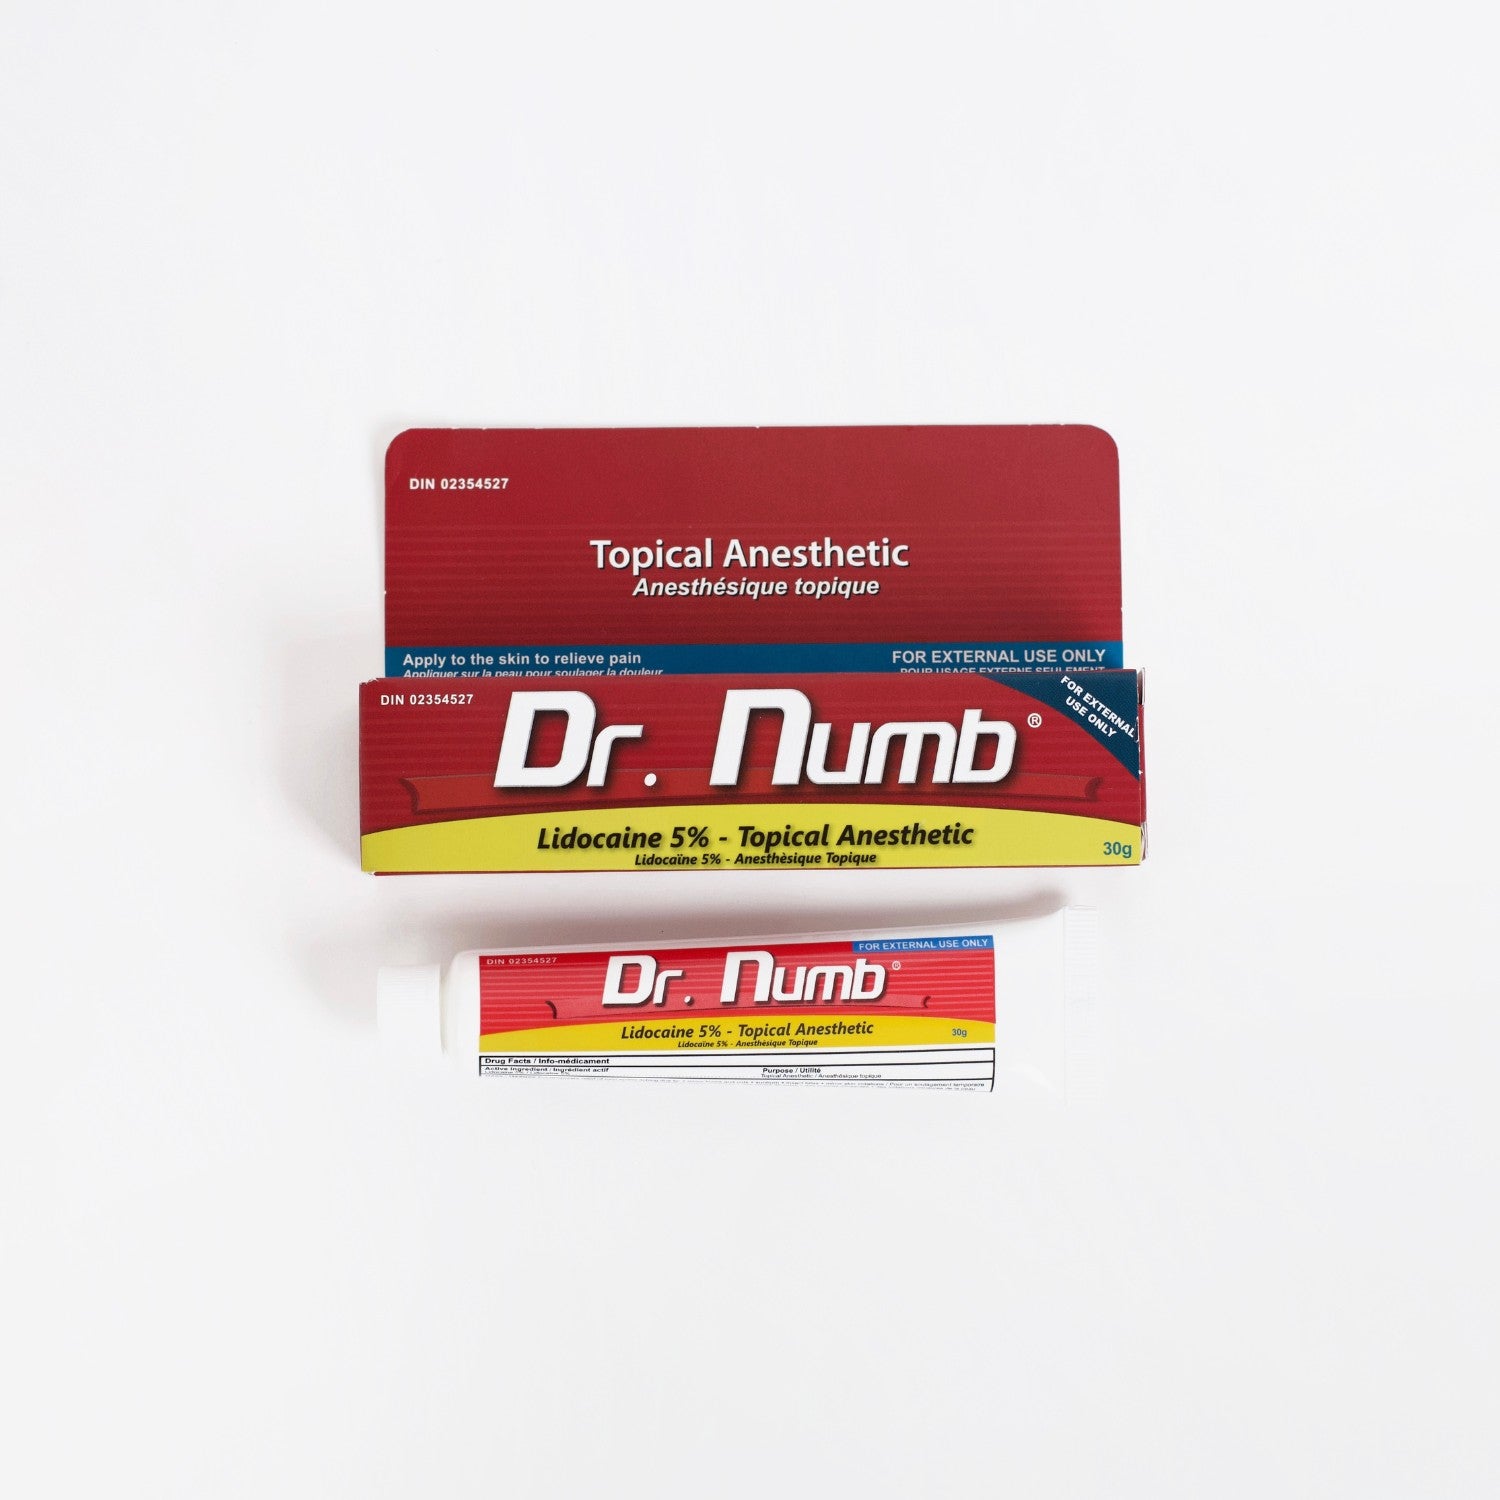 Dr. Numb Topical Anesthetic, Dr. Numb Lidocaine cream, permanent makeup topical anesthetic